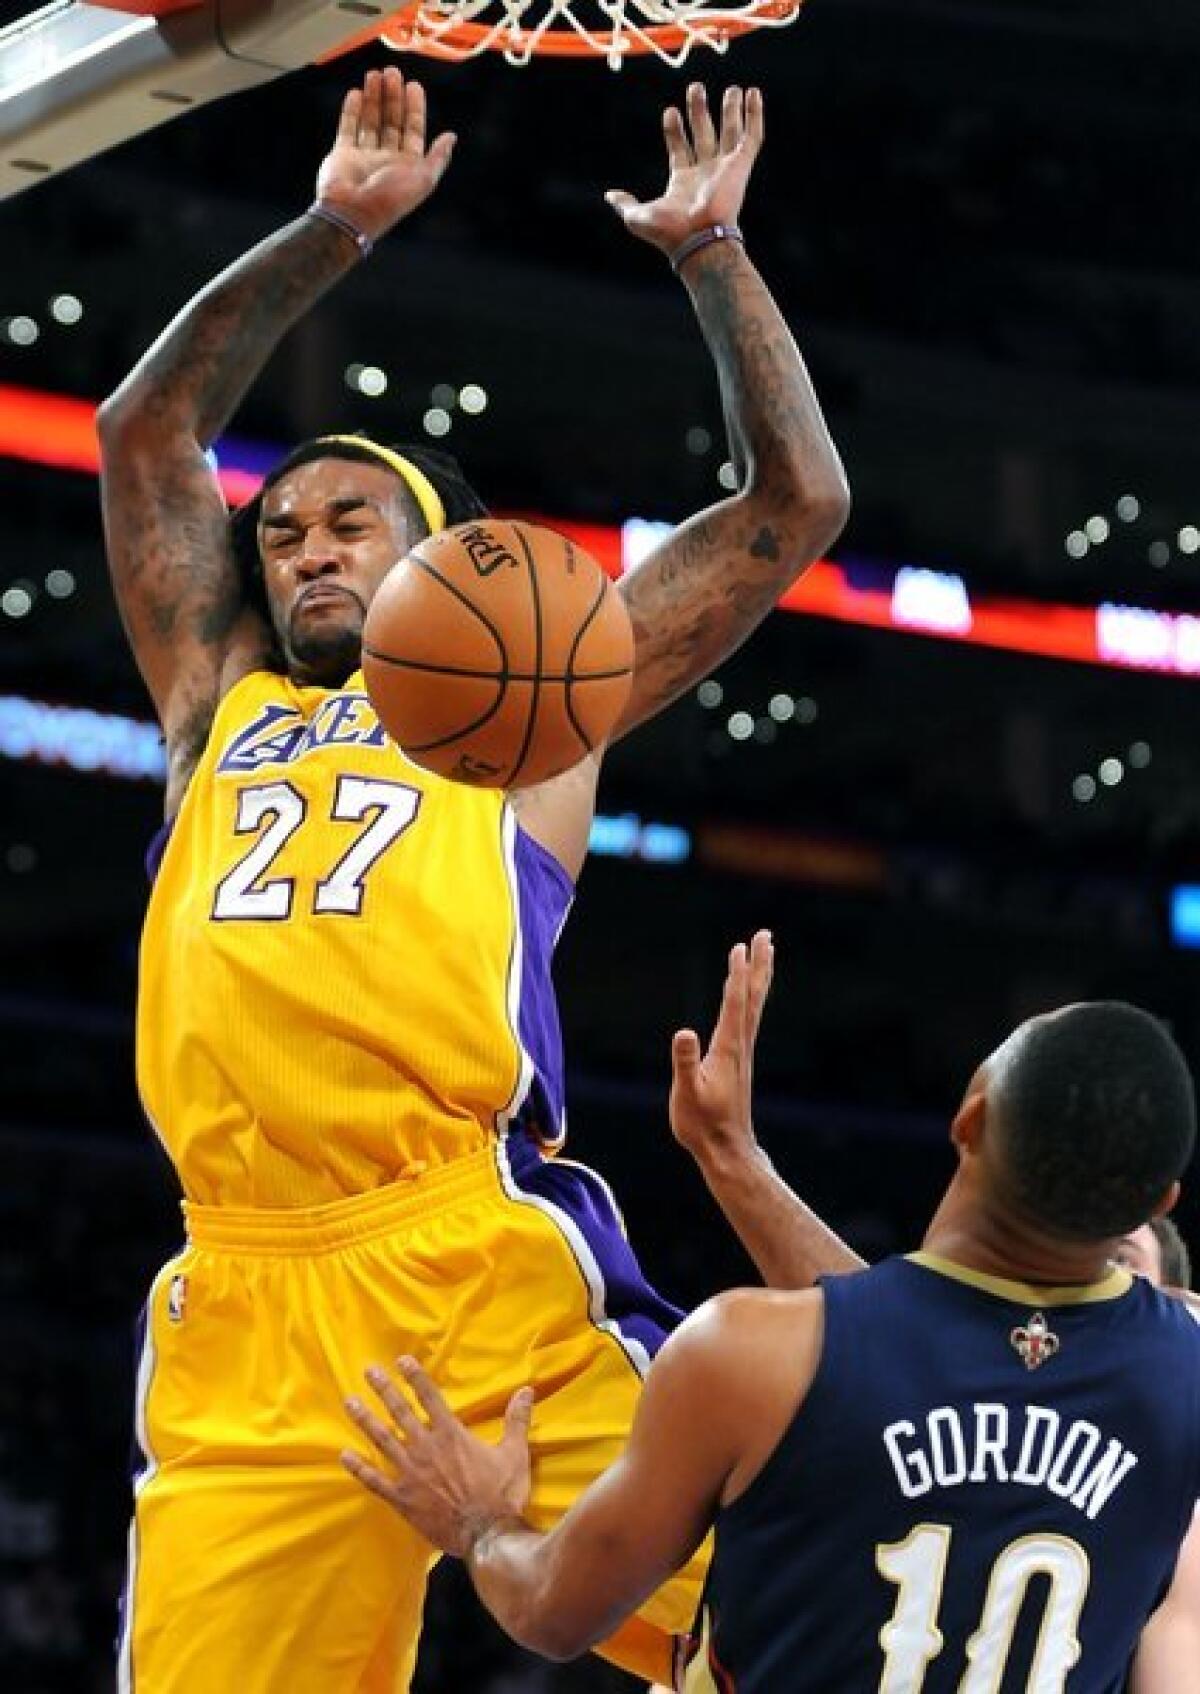 Jordan Hill dunks over Eric Gordon during the Lakers' win over the New Orleans Pelicans, 116-95, on Tuesday at Staples Center.